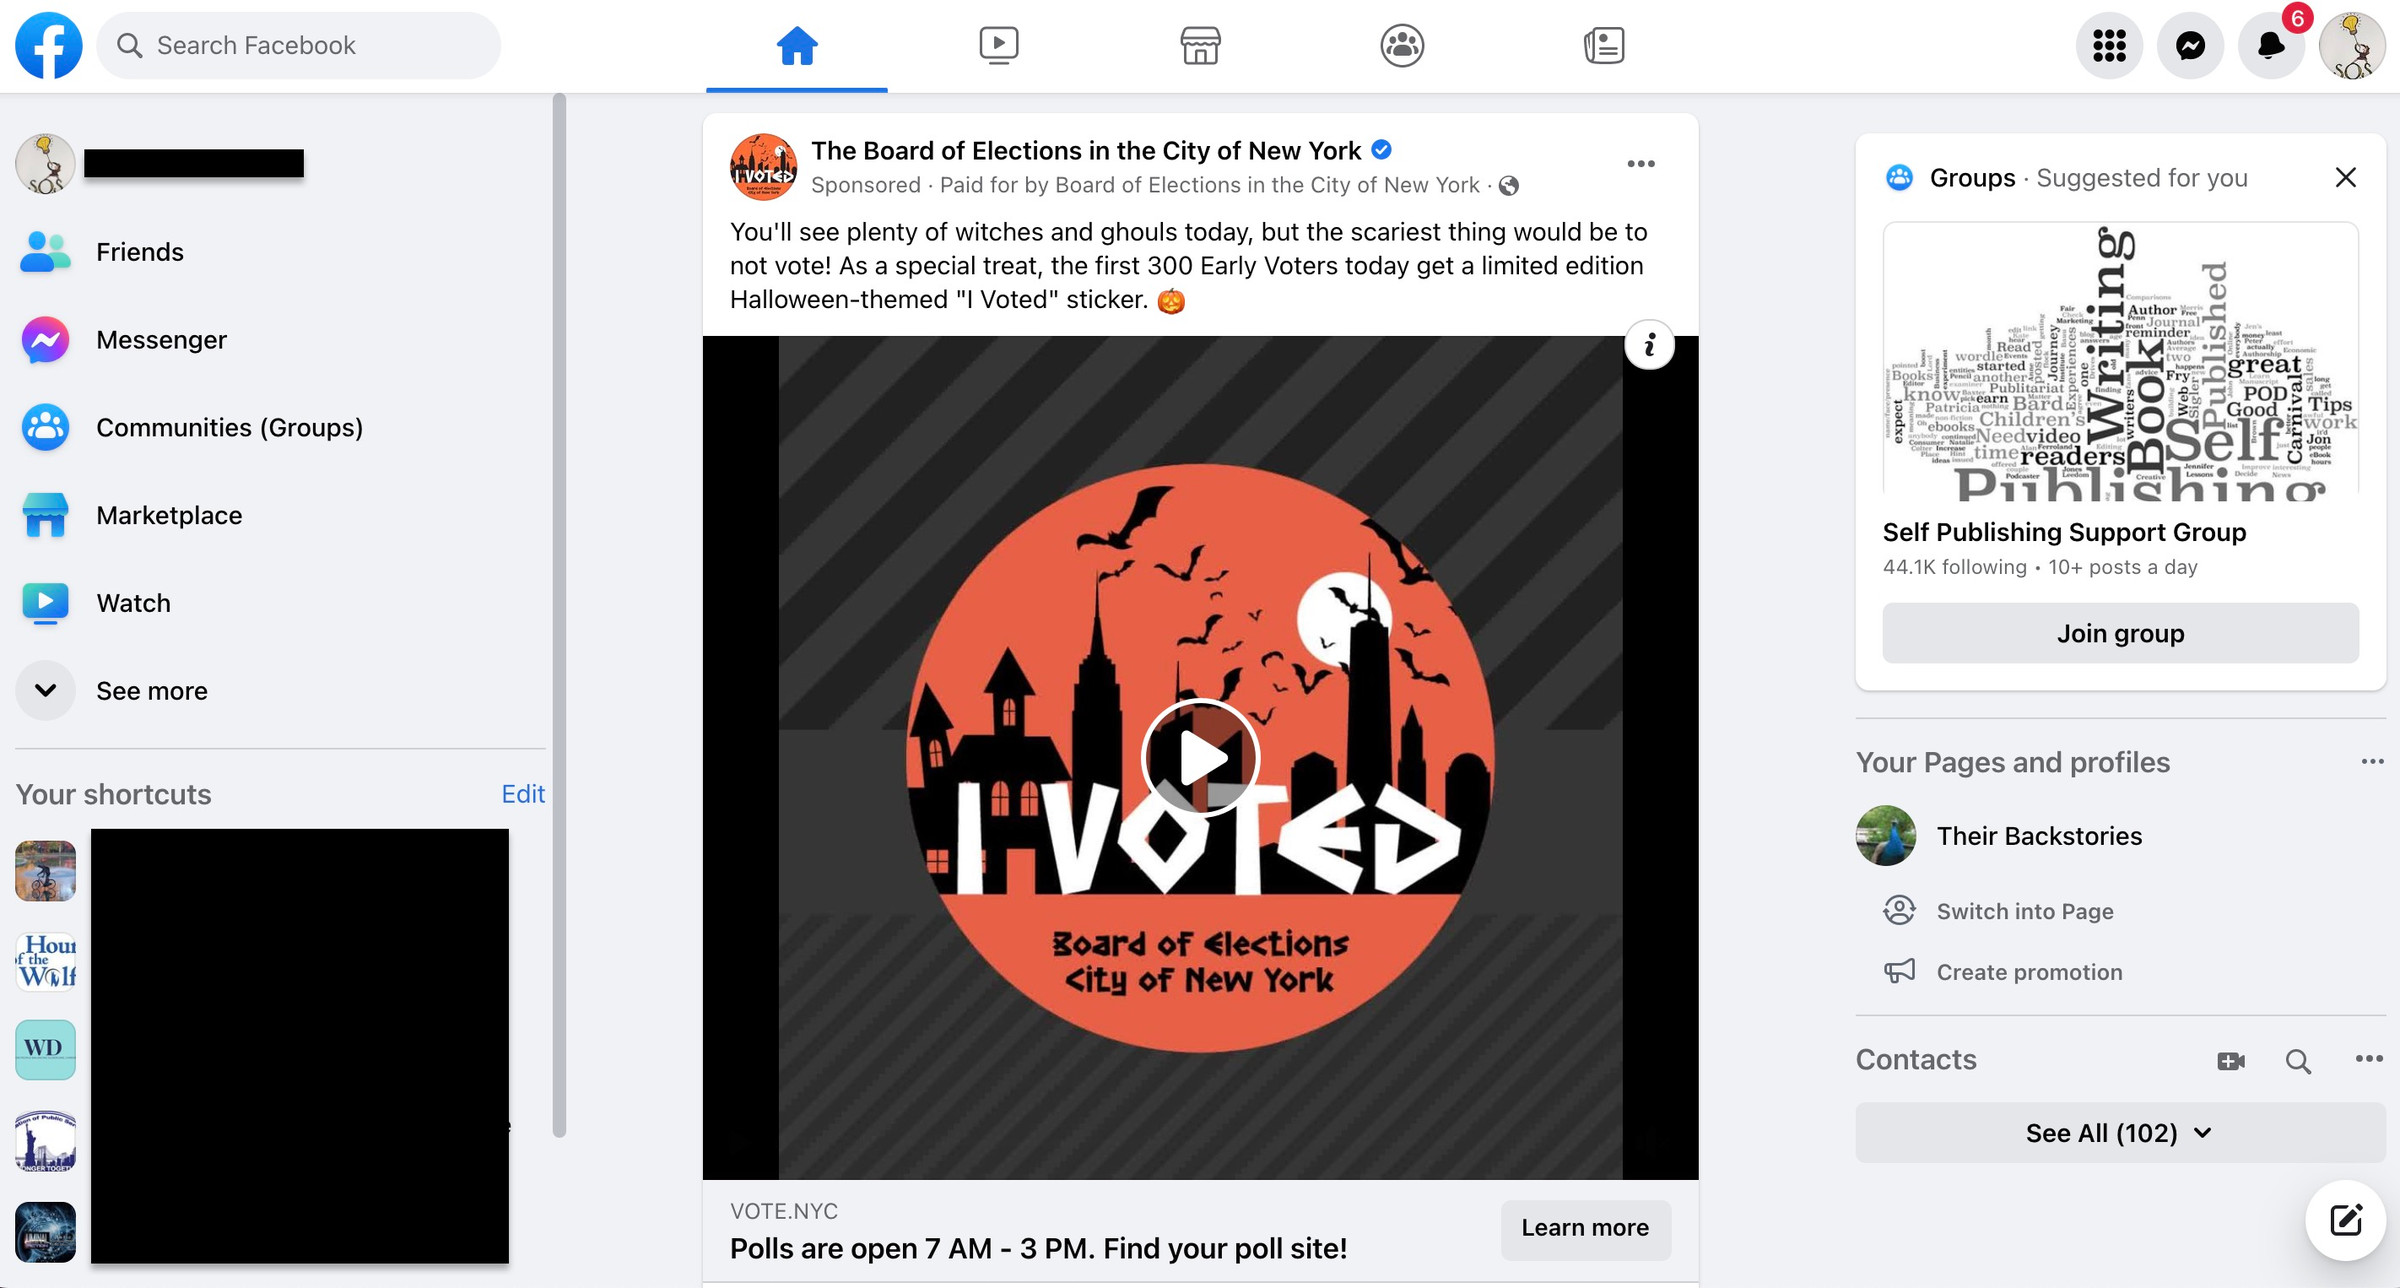 Facebook page with large “I voted” image in the center.